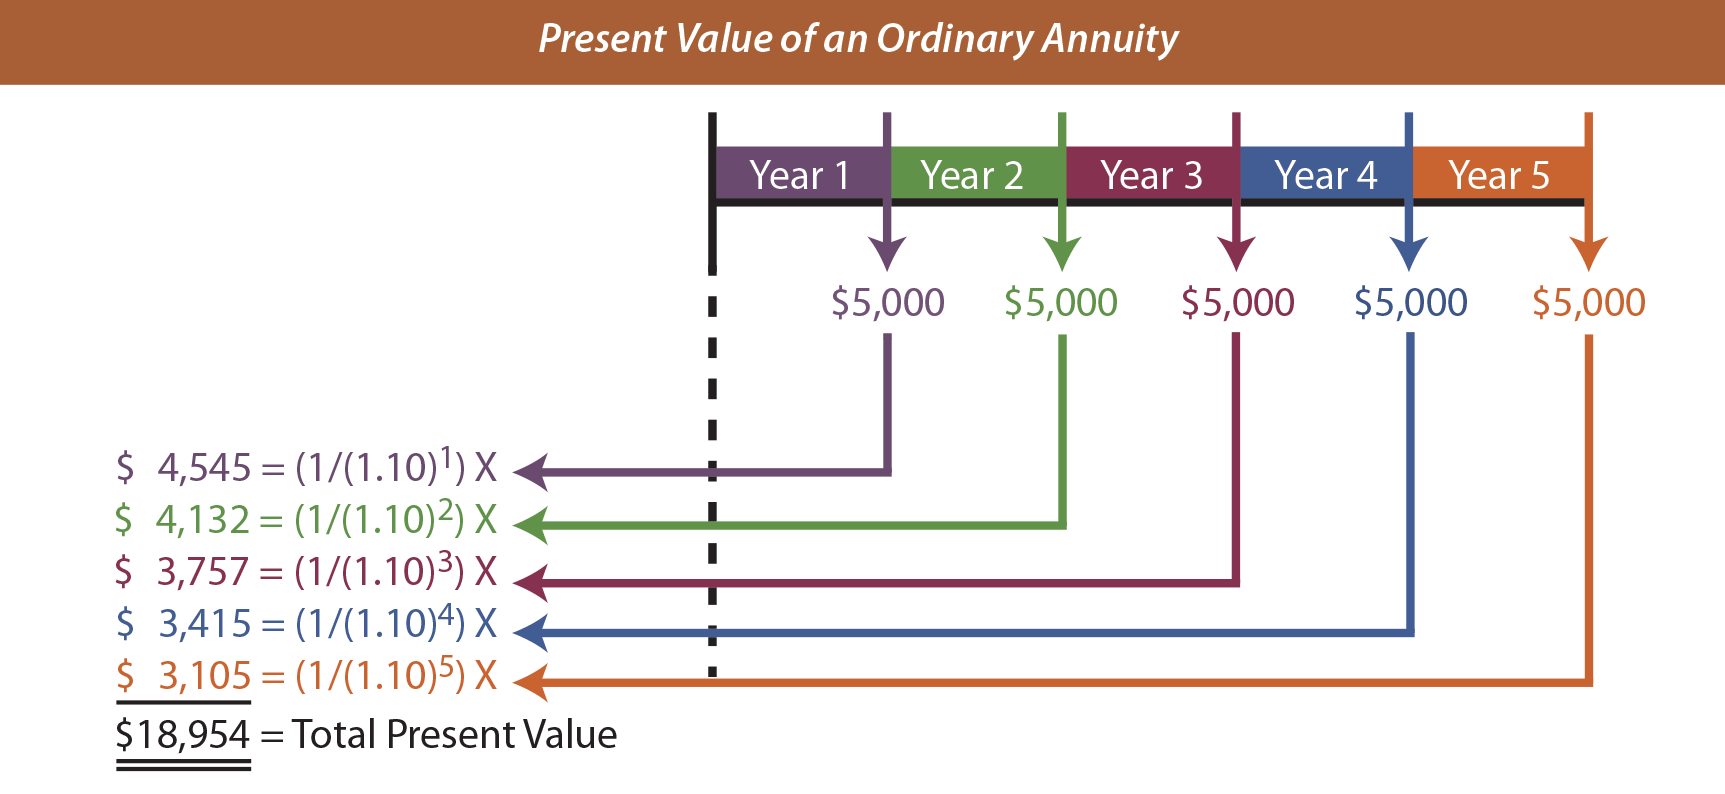 Present Value of an Ordinary Annuity Illustration